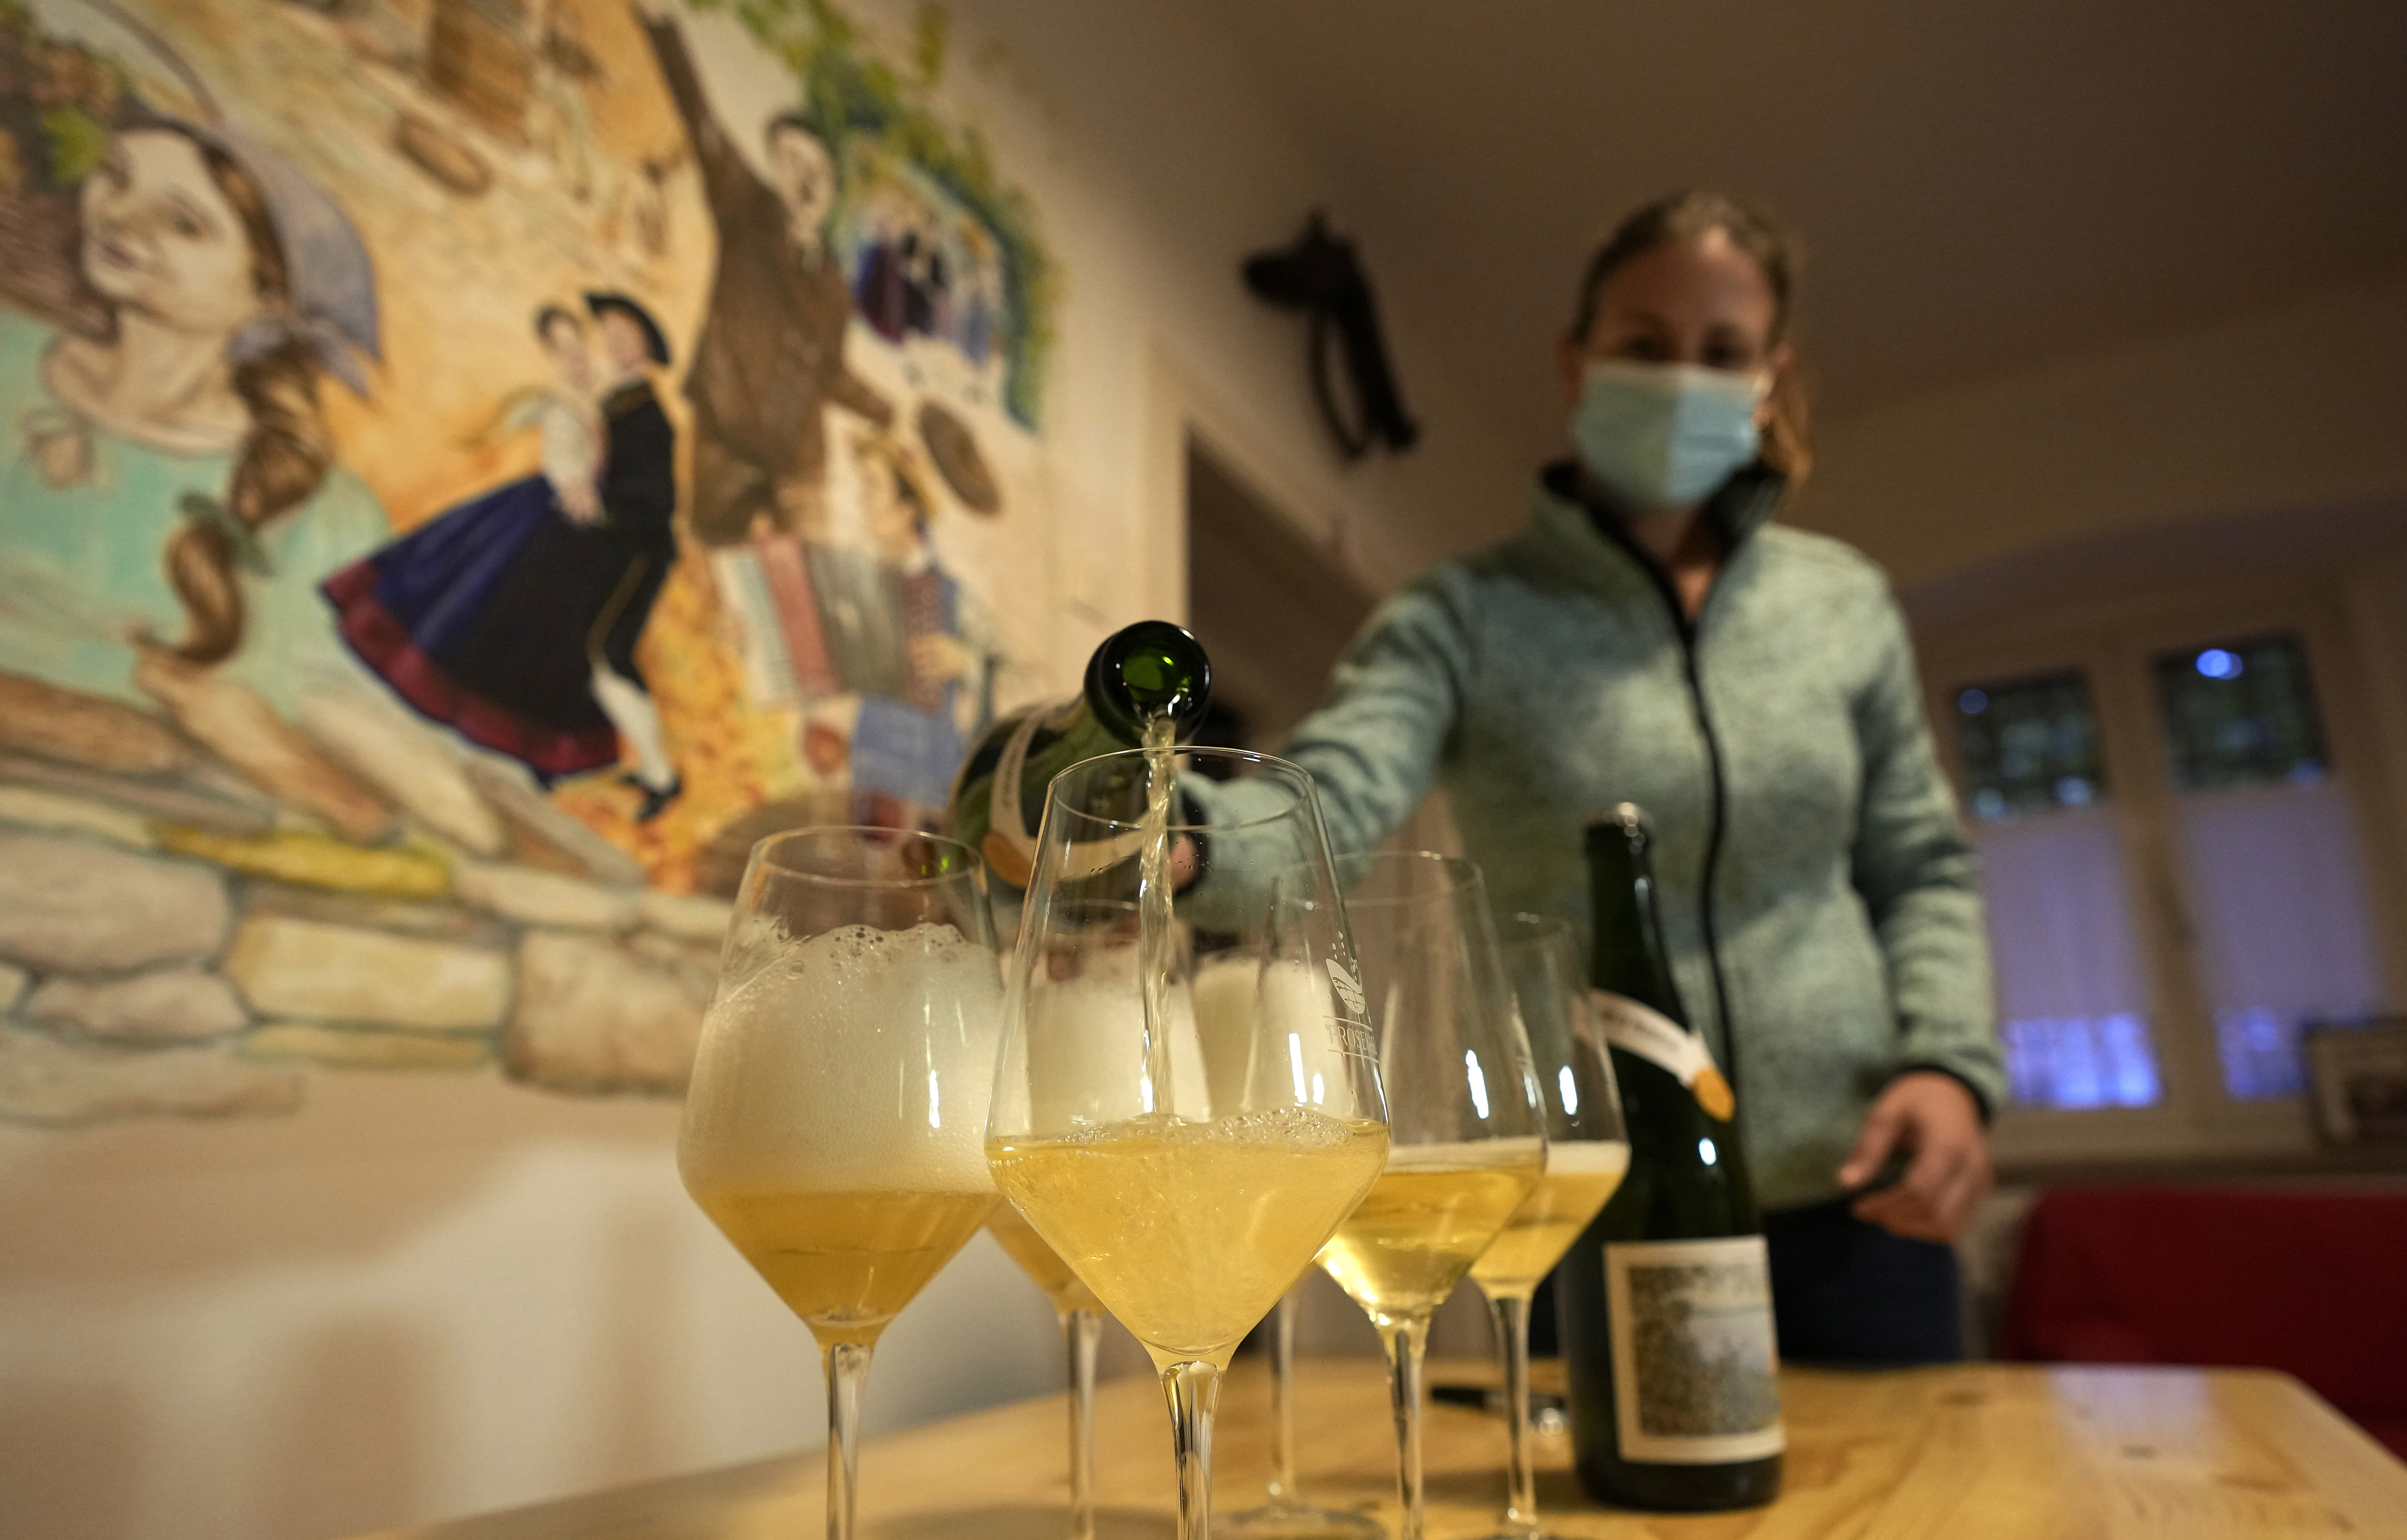 Winemaker Vesna Bukavec pours a Prosekar wine in Prosecco, near Trieste, Italy. Italy has pledged to defend the name of the popular sparkling wine Prosecco as Croatia petitions the European Union to allow its winemakers to call their sweet dessert wine Prosek.